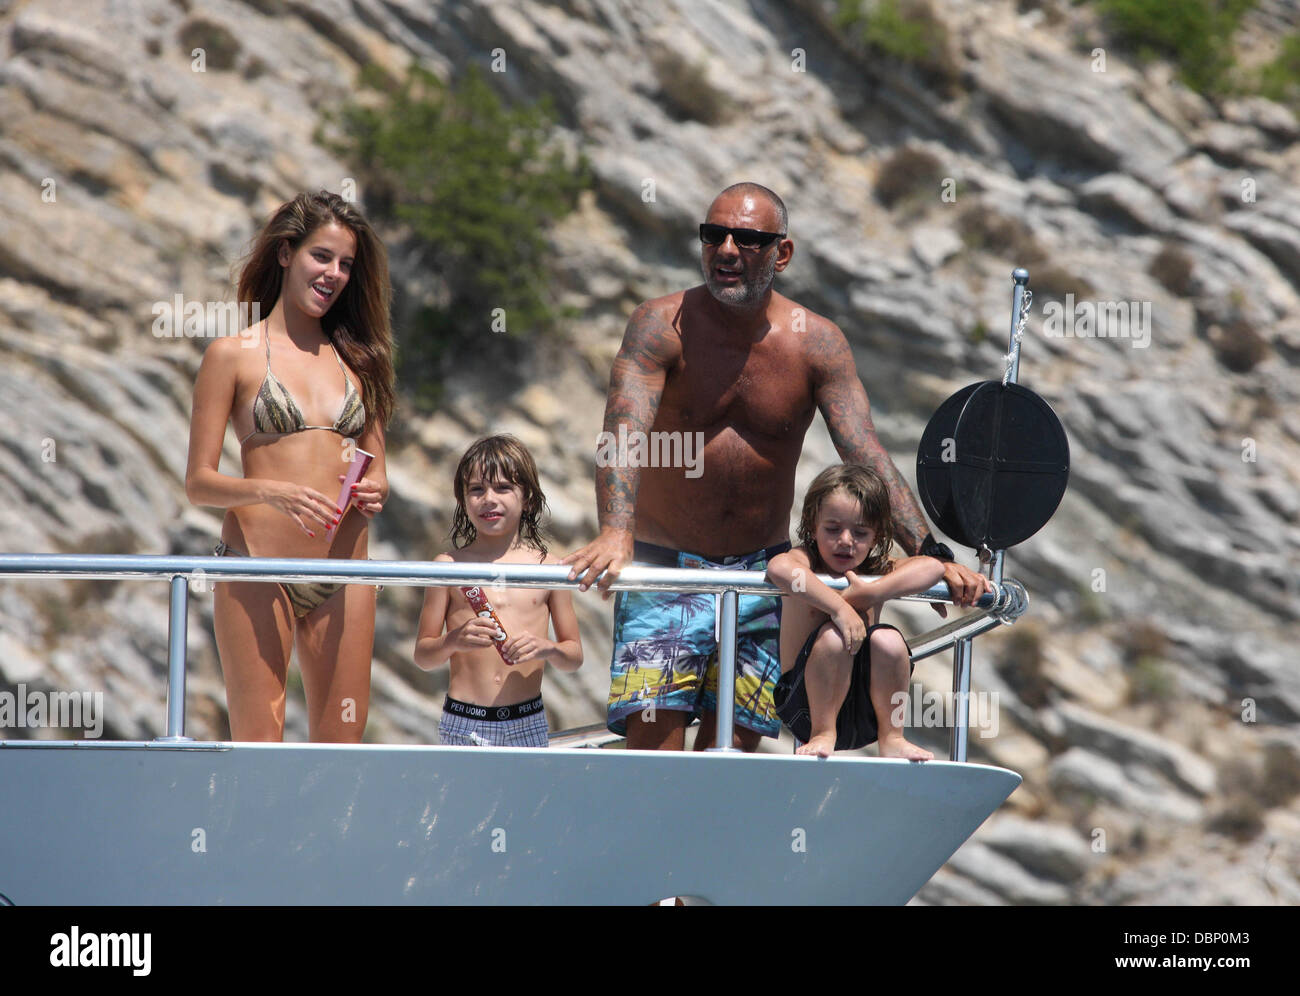 Christian Audigier with his sons and girlfriend Nathalie Sorensen  vacationing on Audigier's private yacht Ibiza, Spain - 31.07.11 Stock Photo  - Alamy